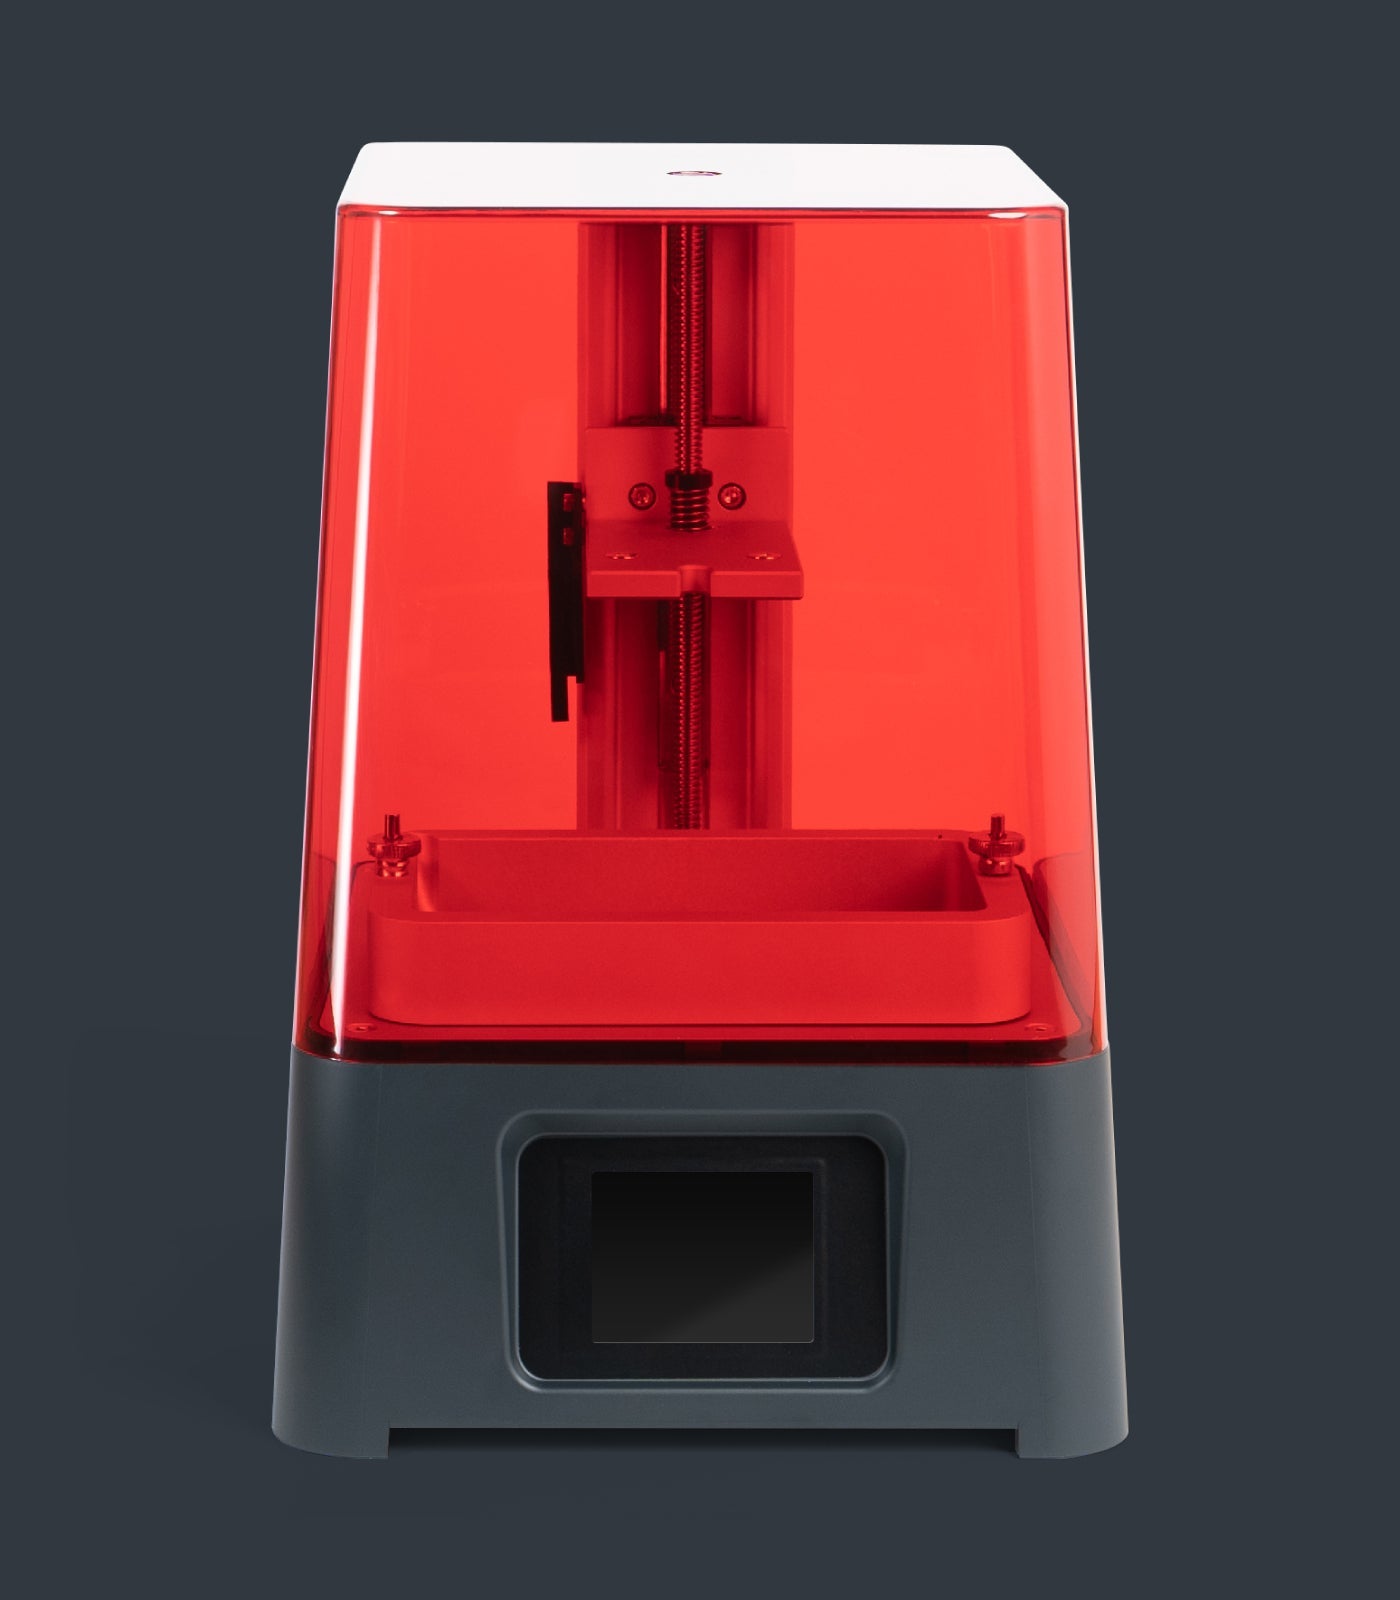 The front view of Sonic Mini. Its compact size makes it a perfect 3D printer for home use.